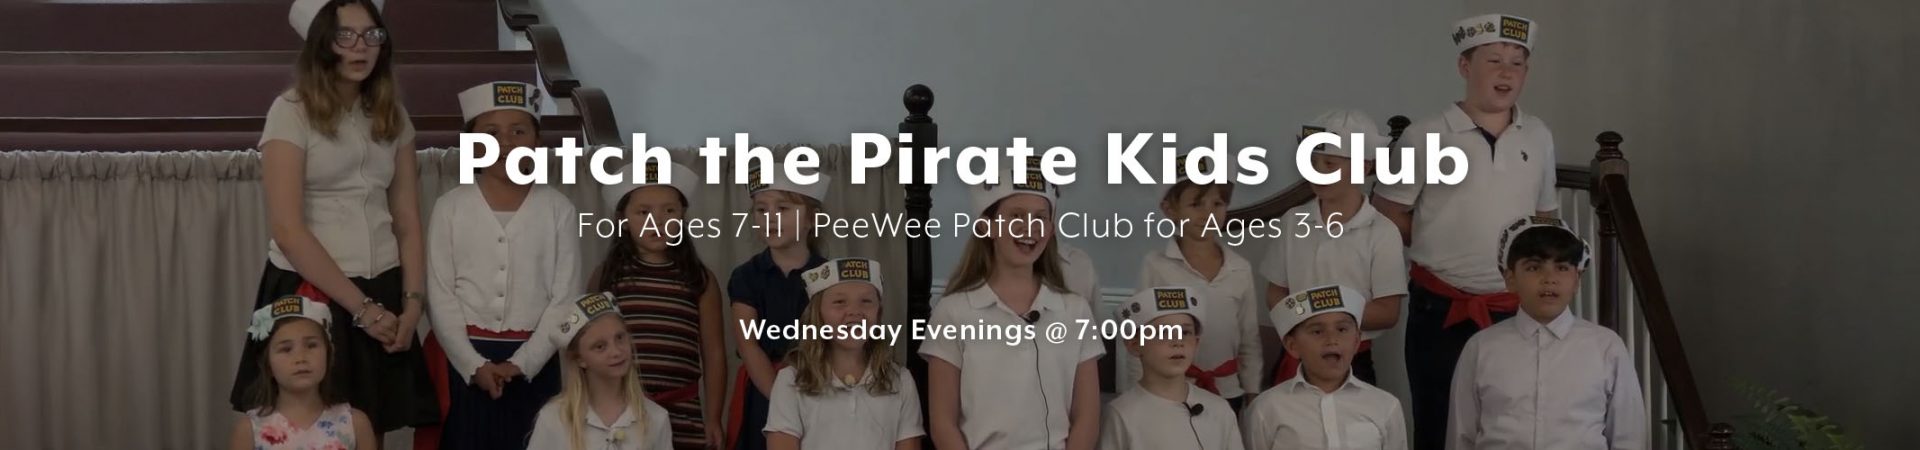 Pirate the Pirate Clubs for kids 3 to 11